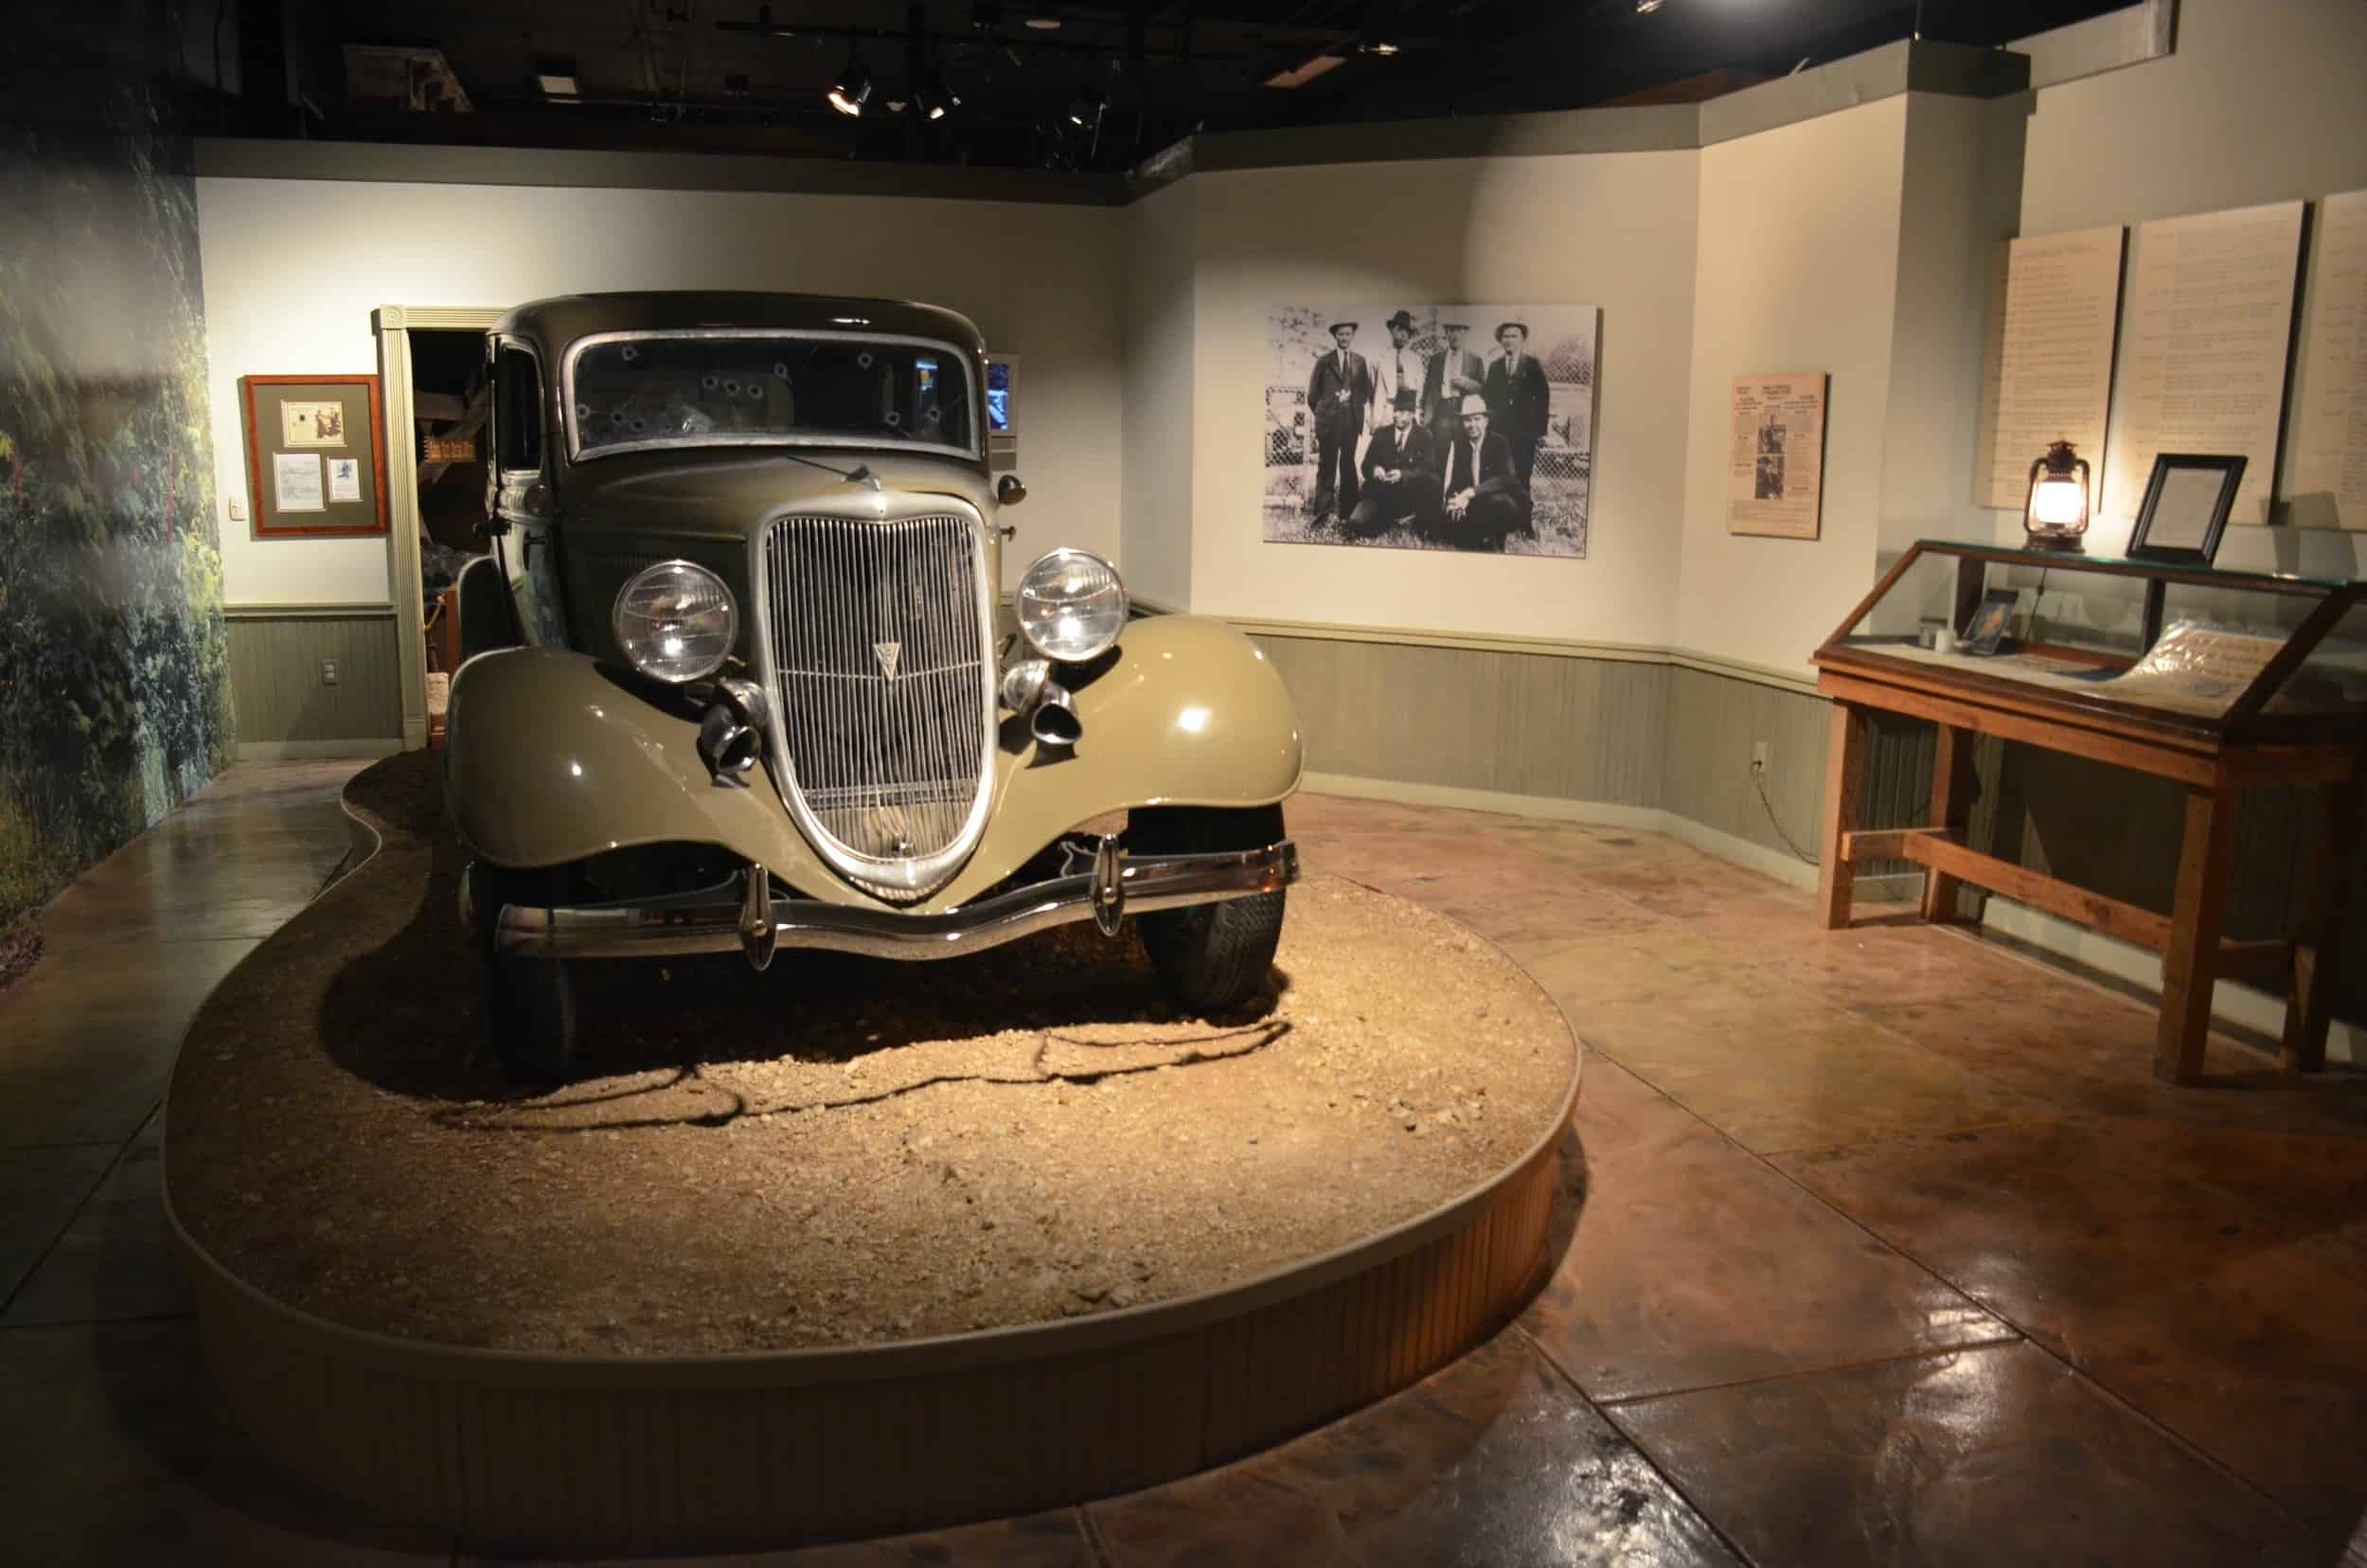 Bonnie and Clyde car at the Texas Ranger Museum in San Antonio, Texas